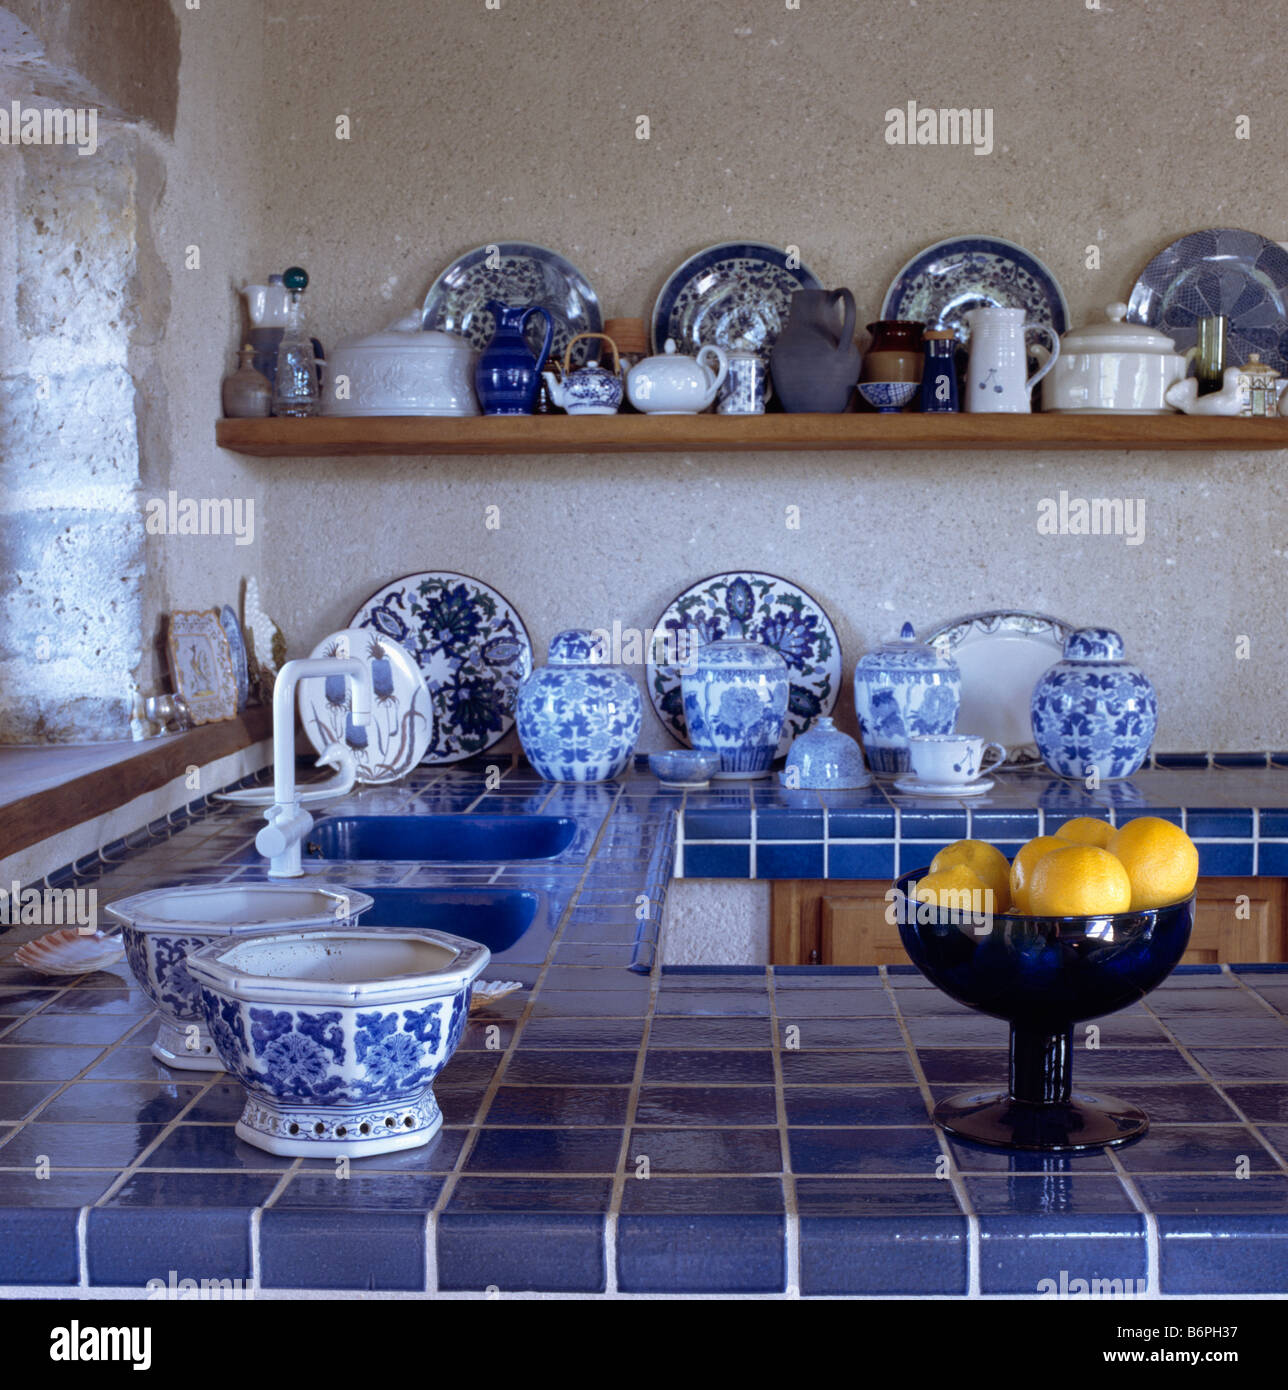 Blue tiled worktop and collection of blue and white china on shelves and worktop in cottage kitchen Stock Photo